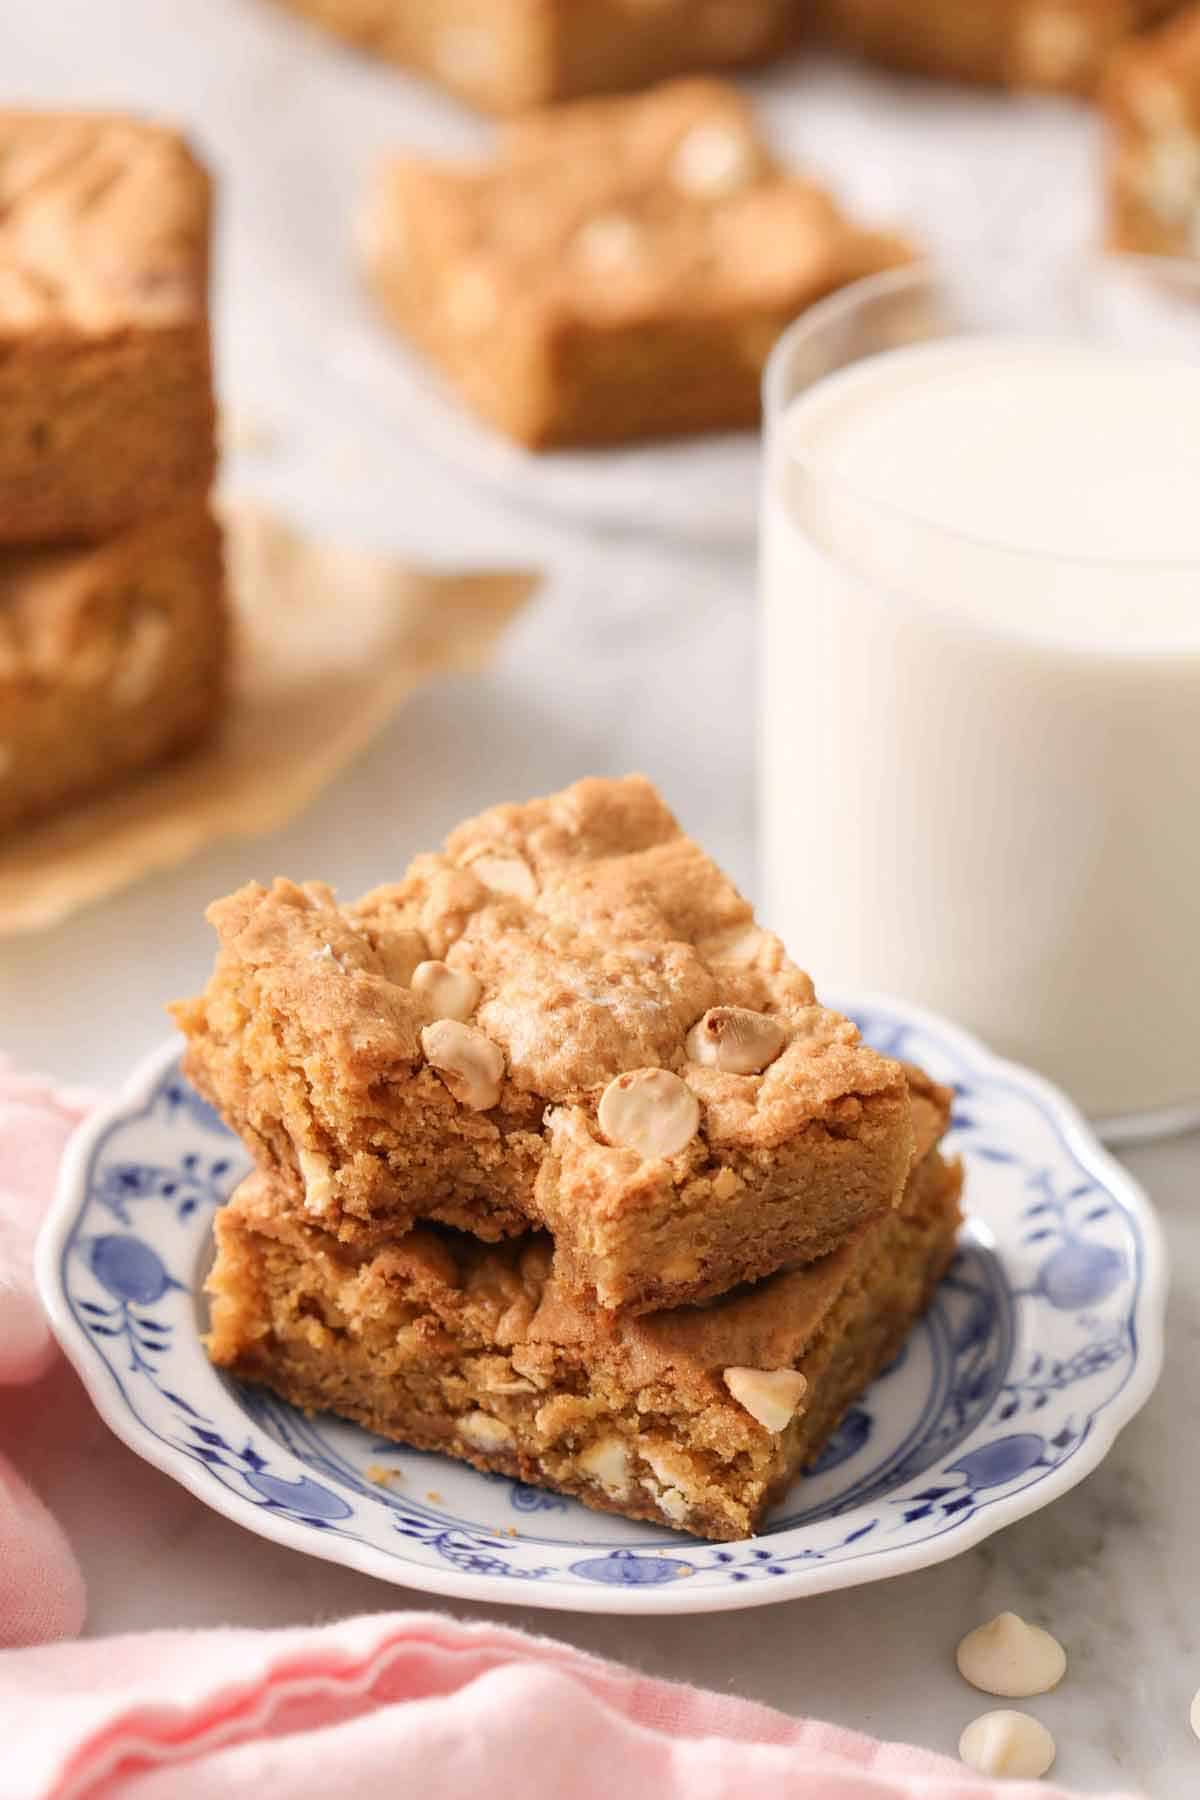 A plate with two blondies, one with a bite taken out, with a glass of milk behind it.